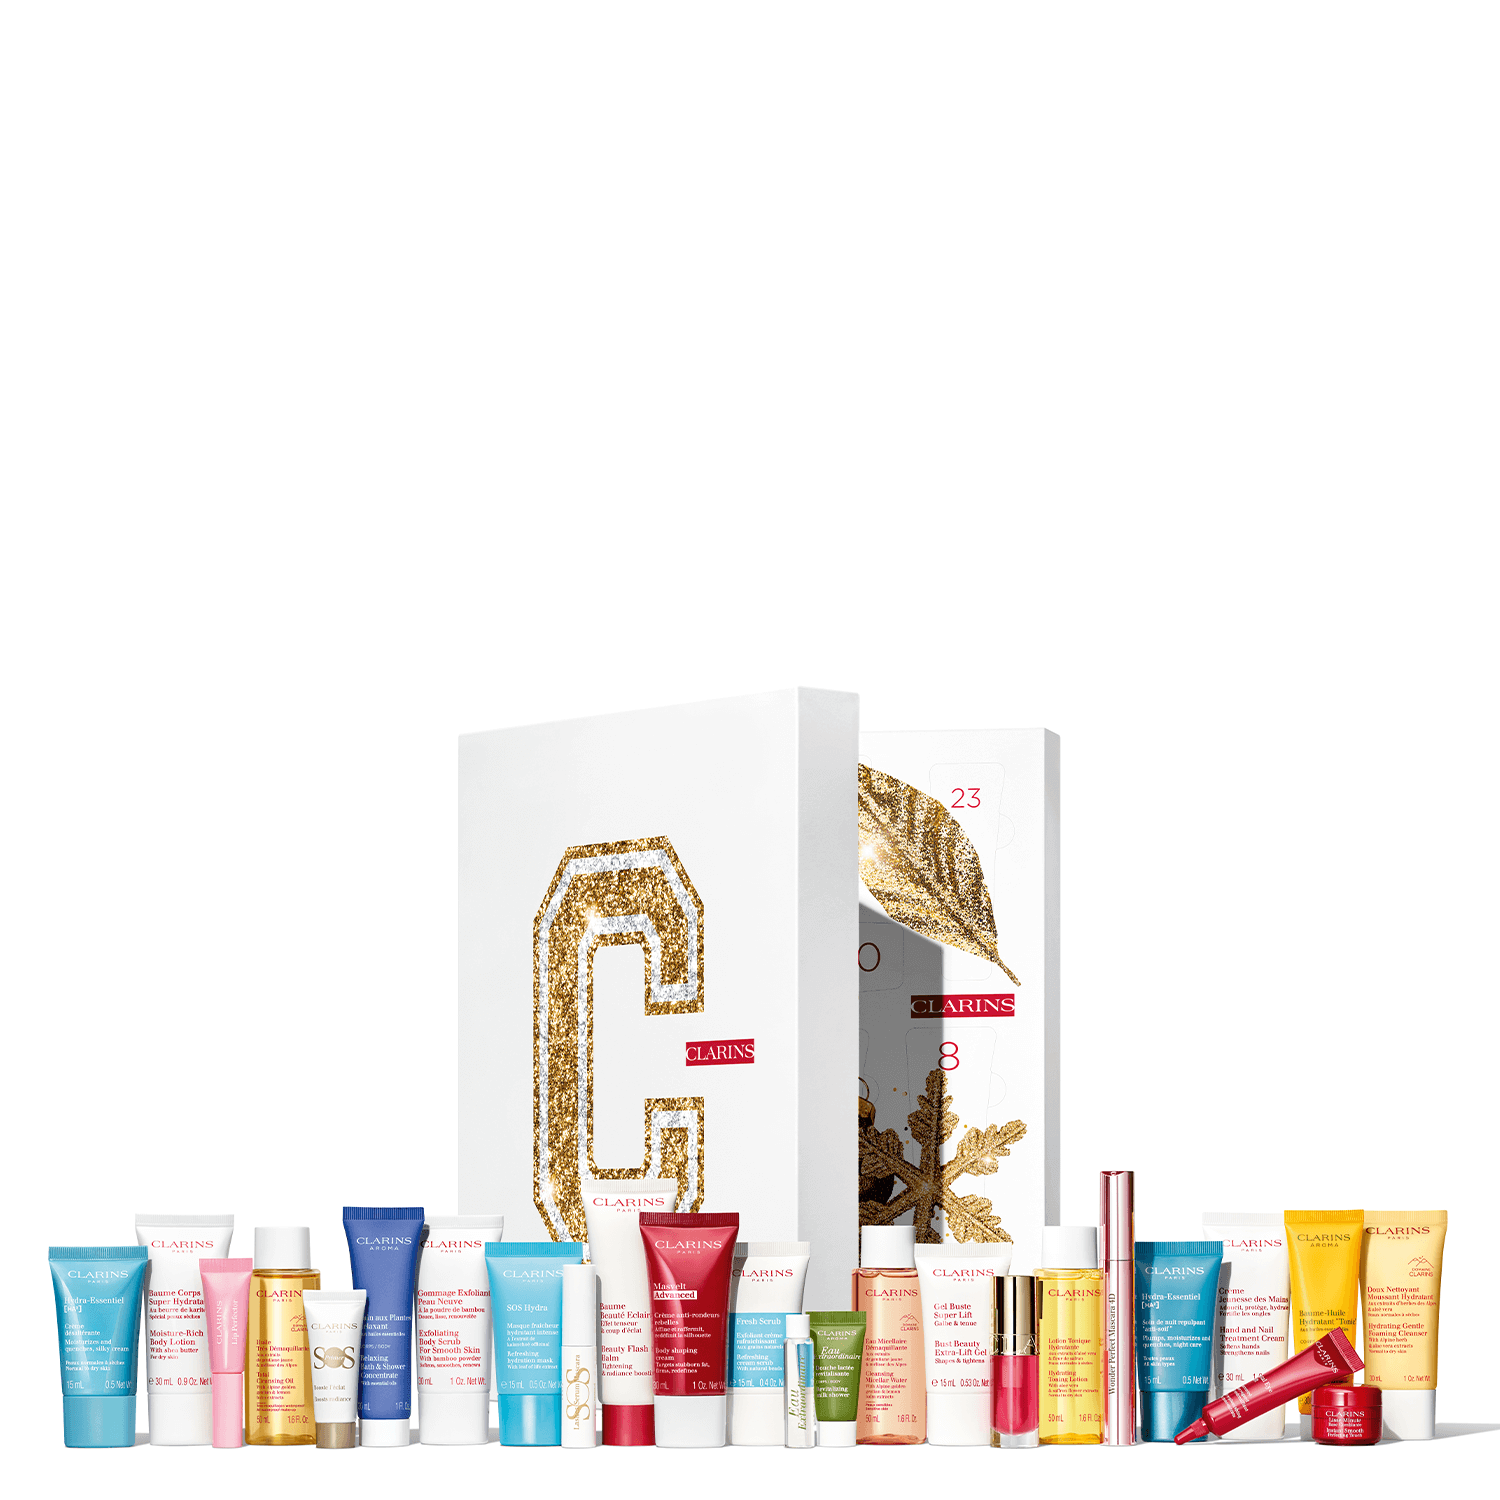 Product image from Clarins Specials - 24 Tage Adventskalender